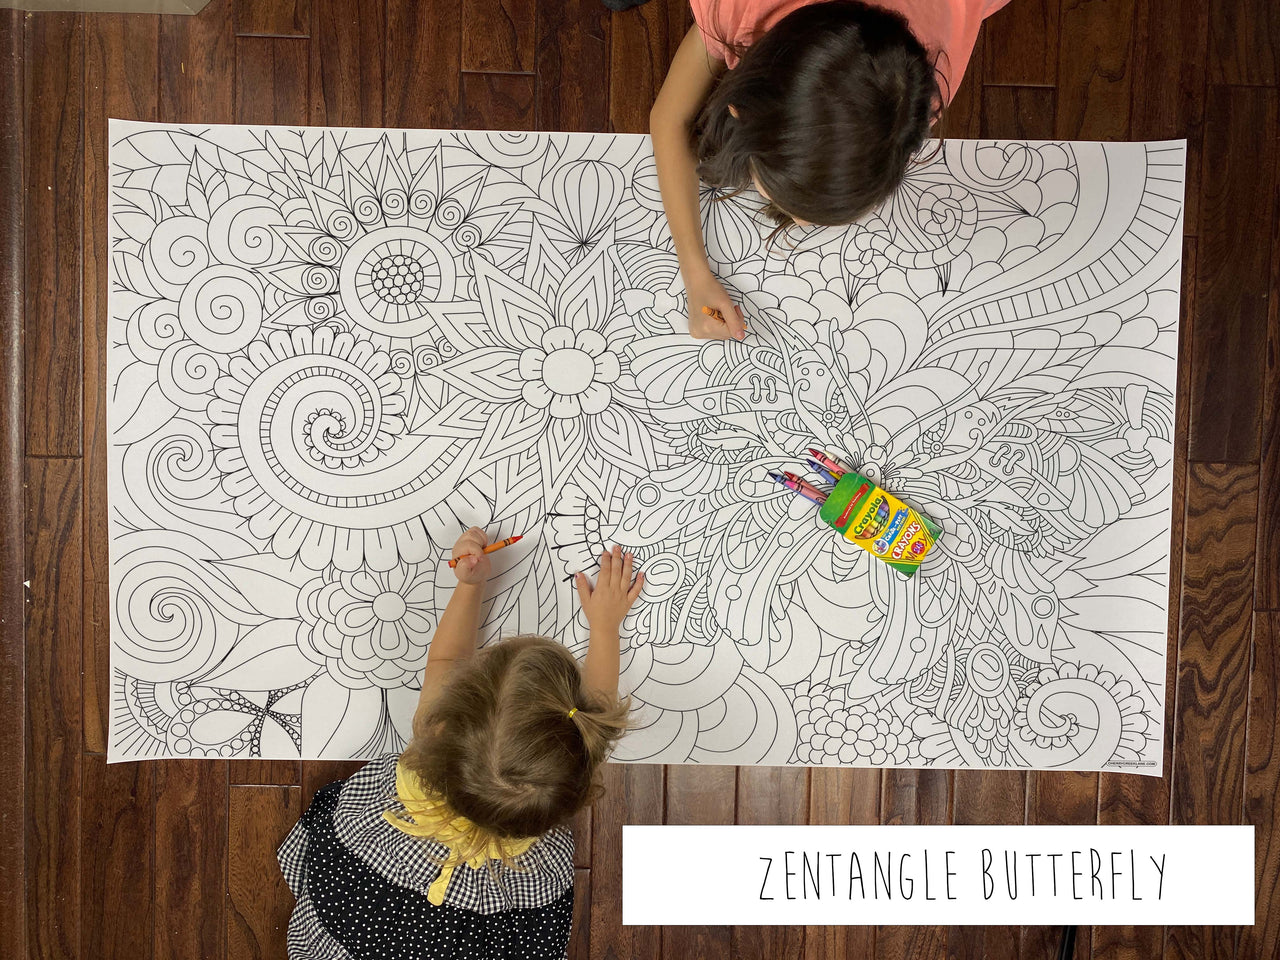 Zentangle Butterfly Table Size Coloring Sheet